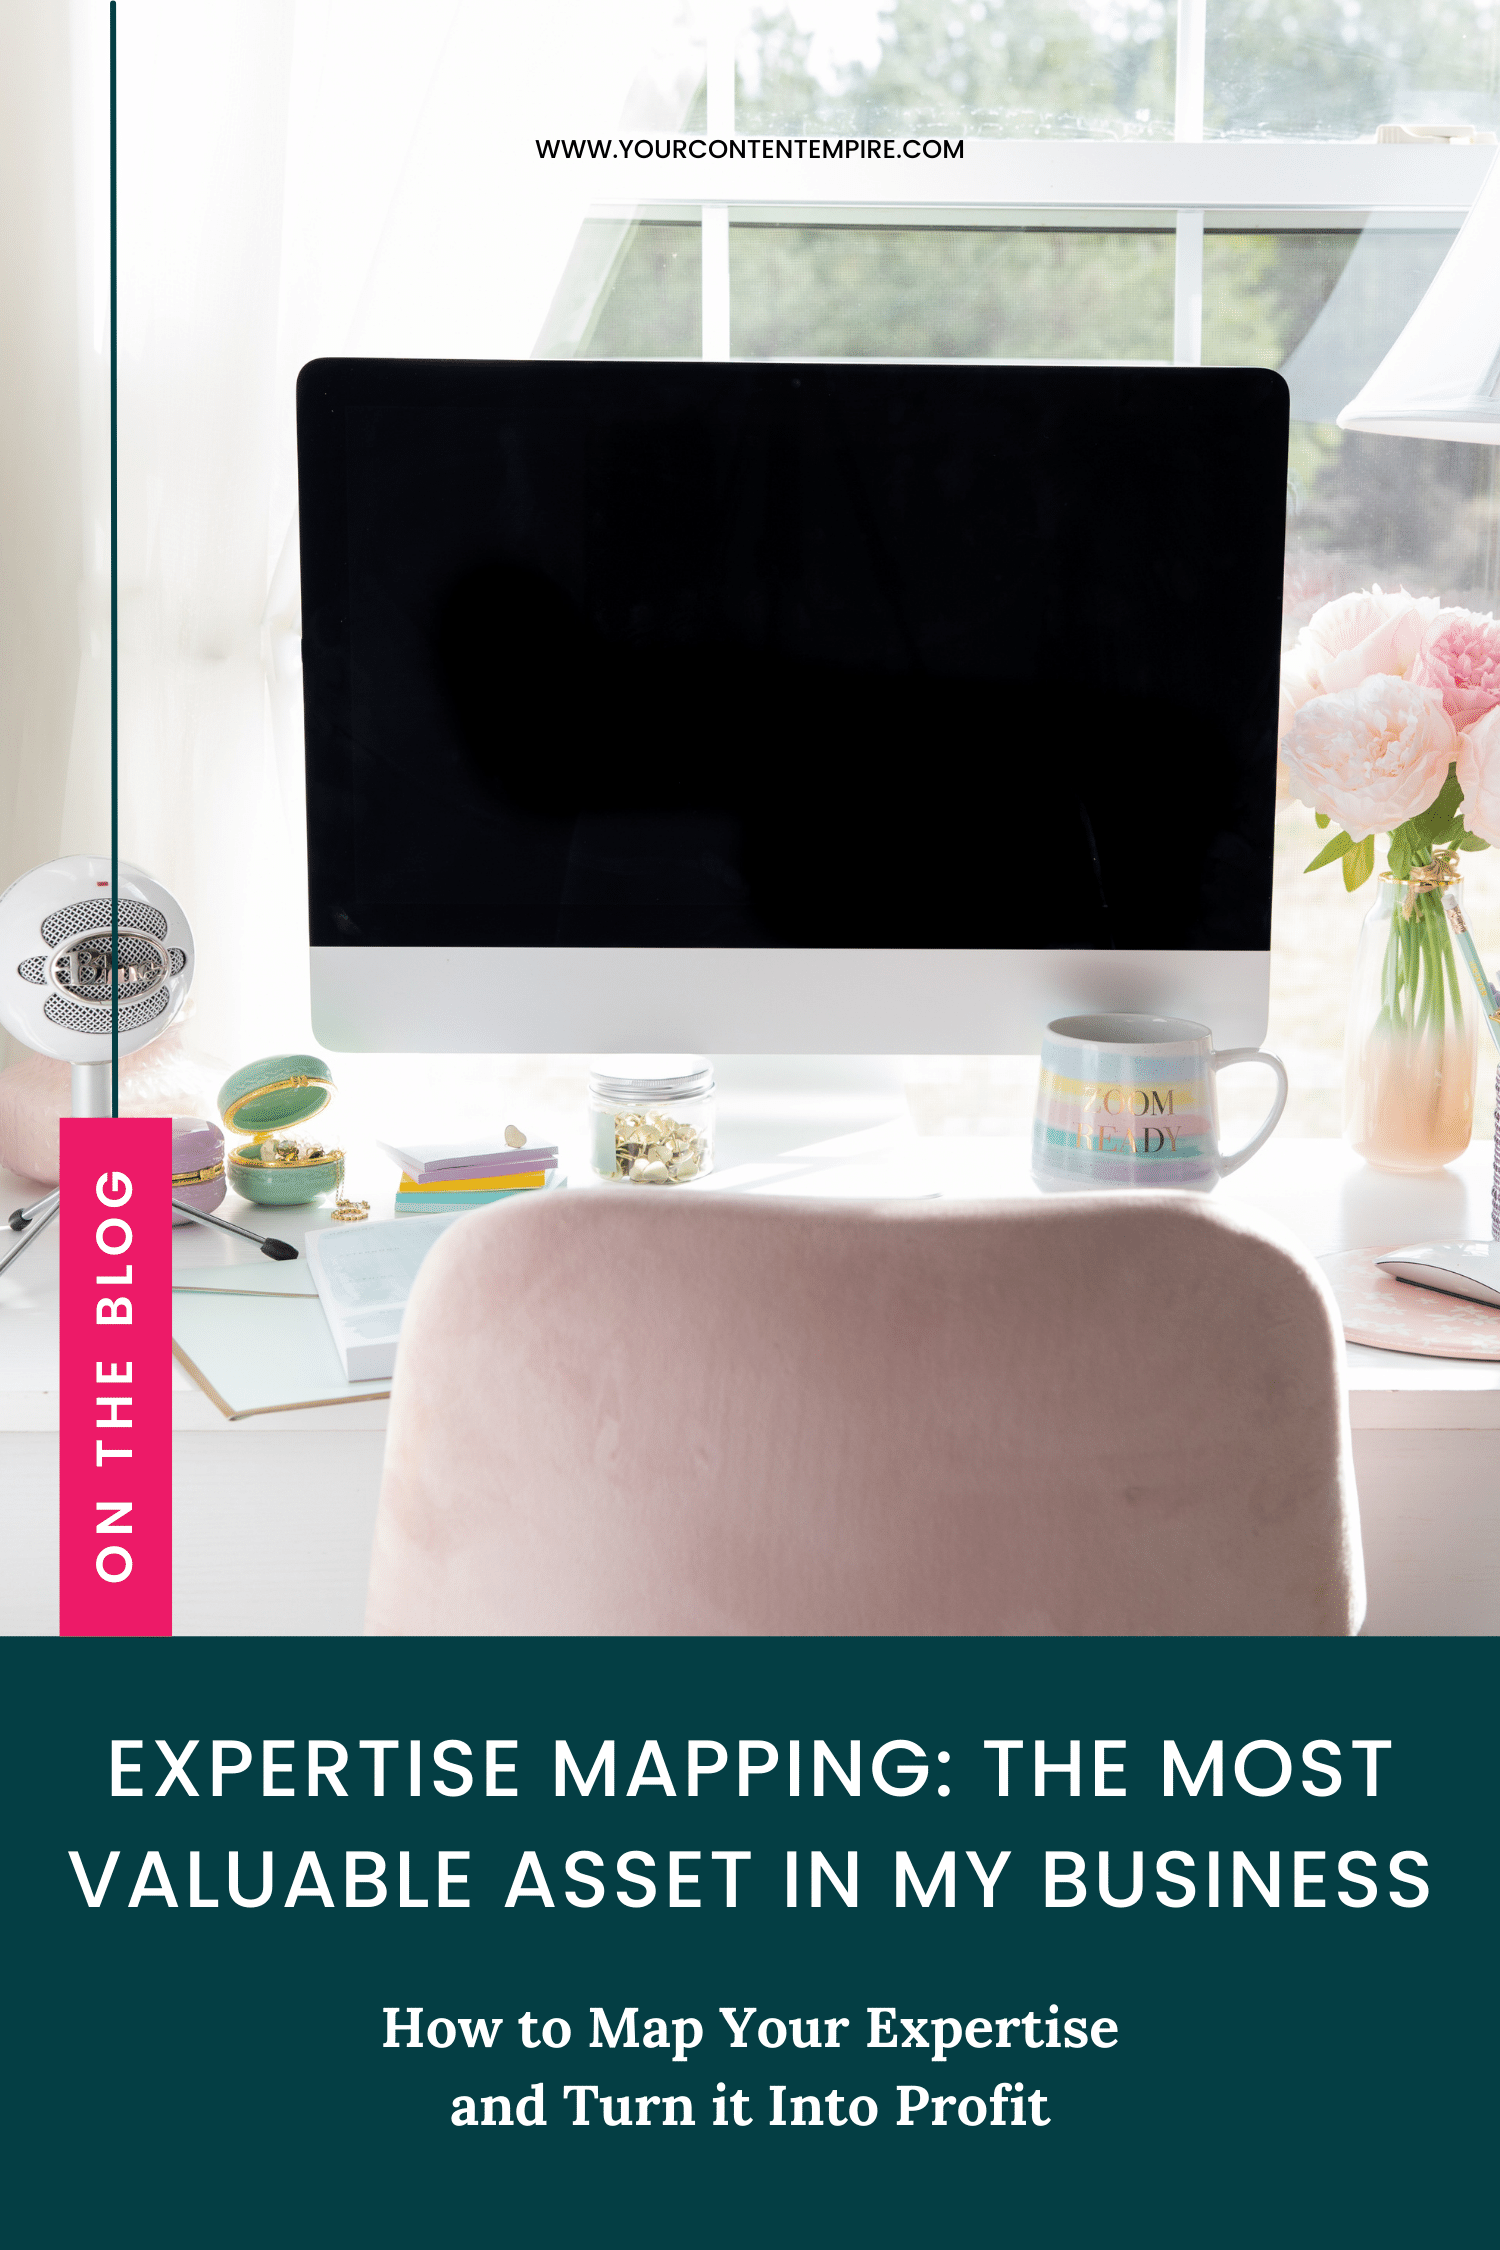 Expertise Mapping: The Most Valuable Asset in My Business